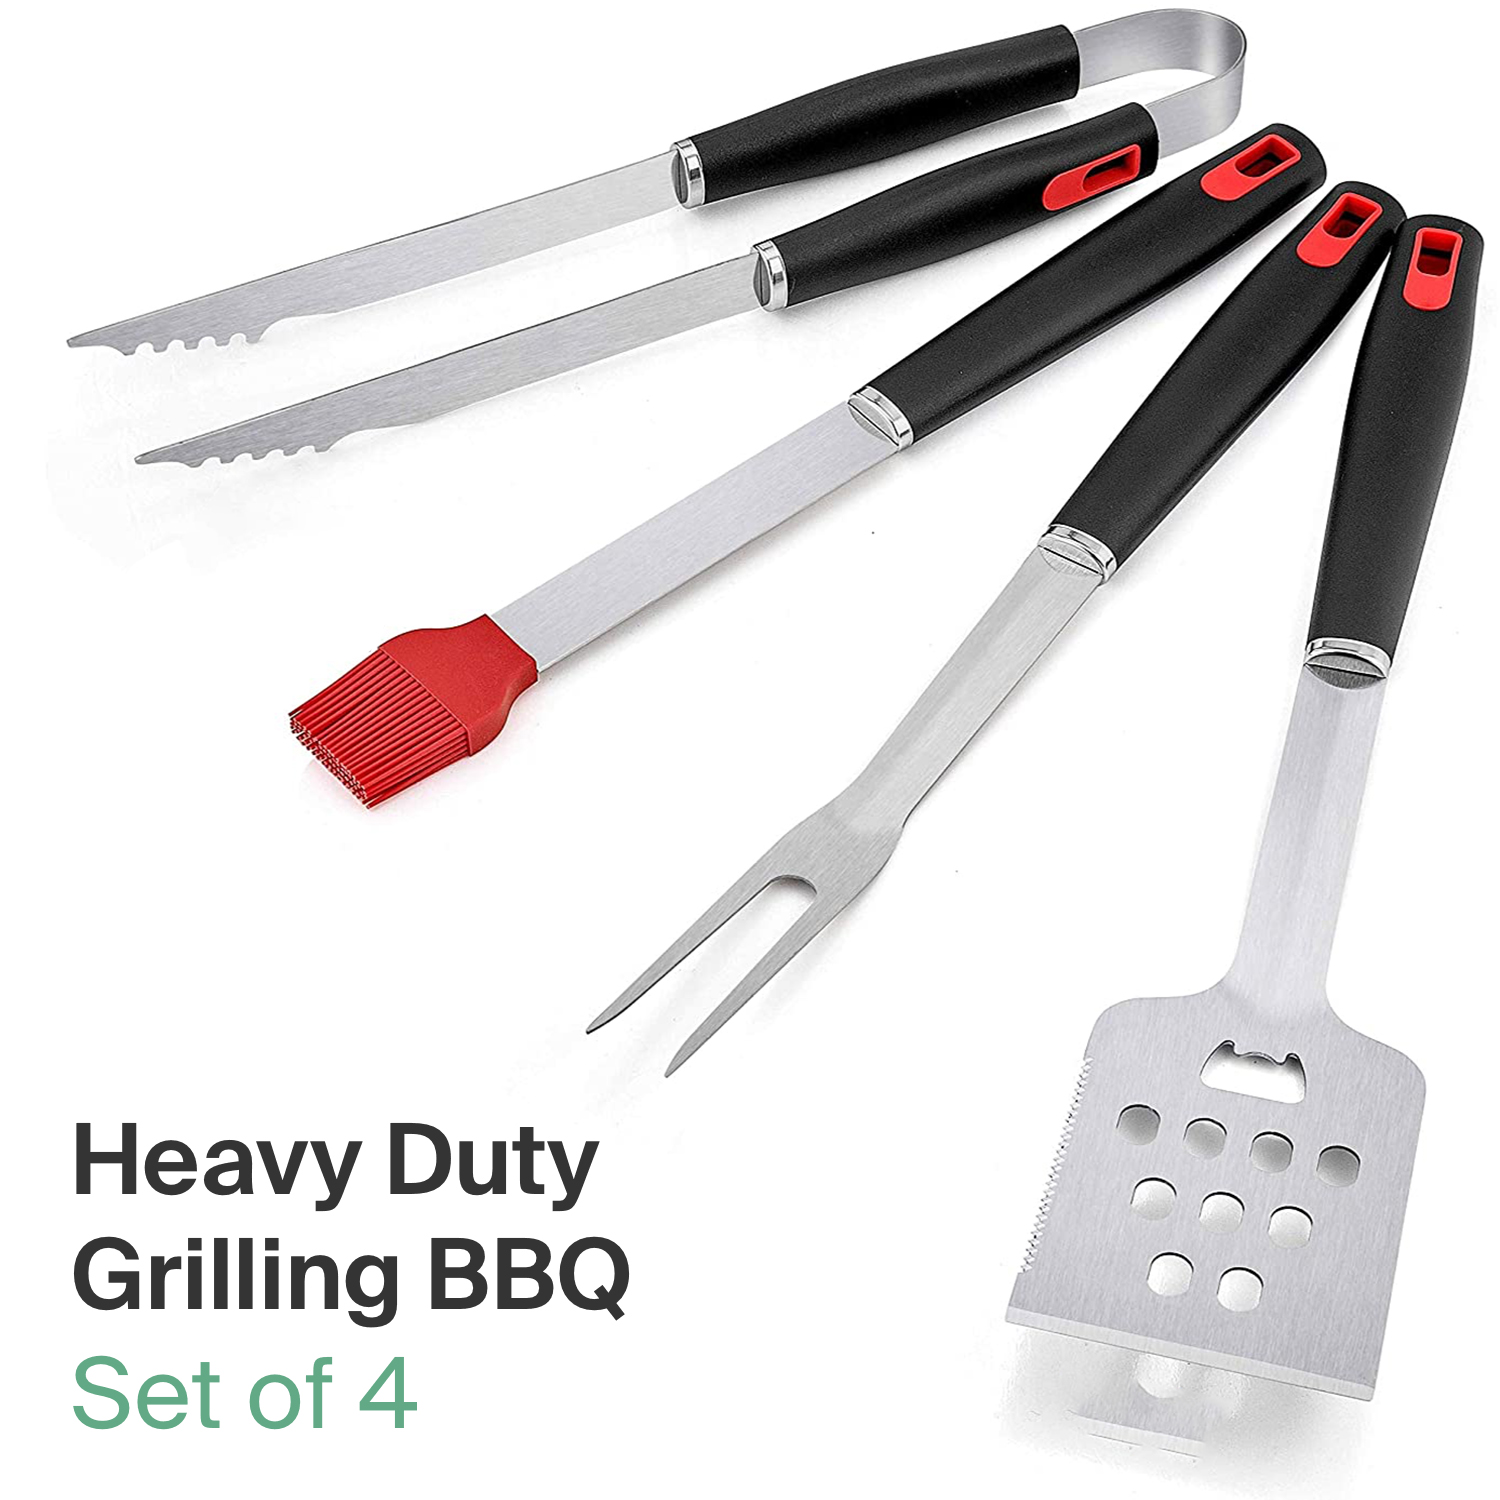 5 Piece BBQ Tool Set for Outdoor Barbecue Grilling (4 Piece Set) - image 3 of 9